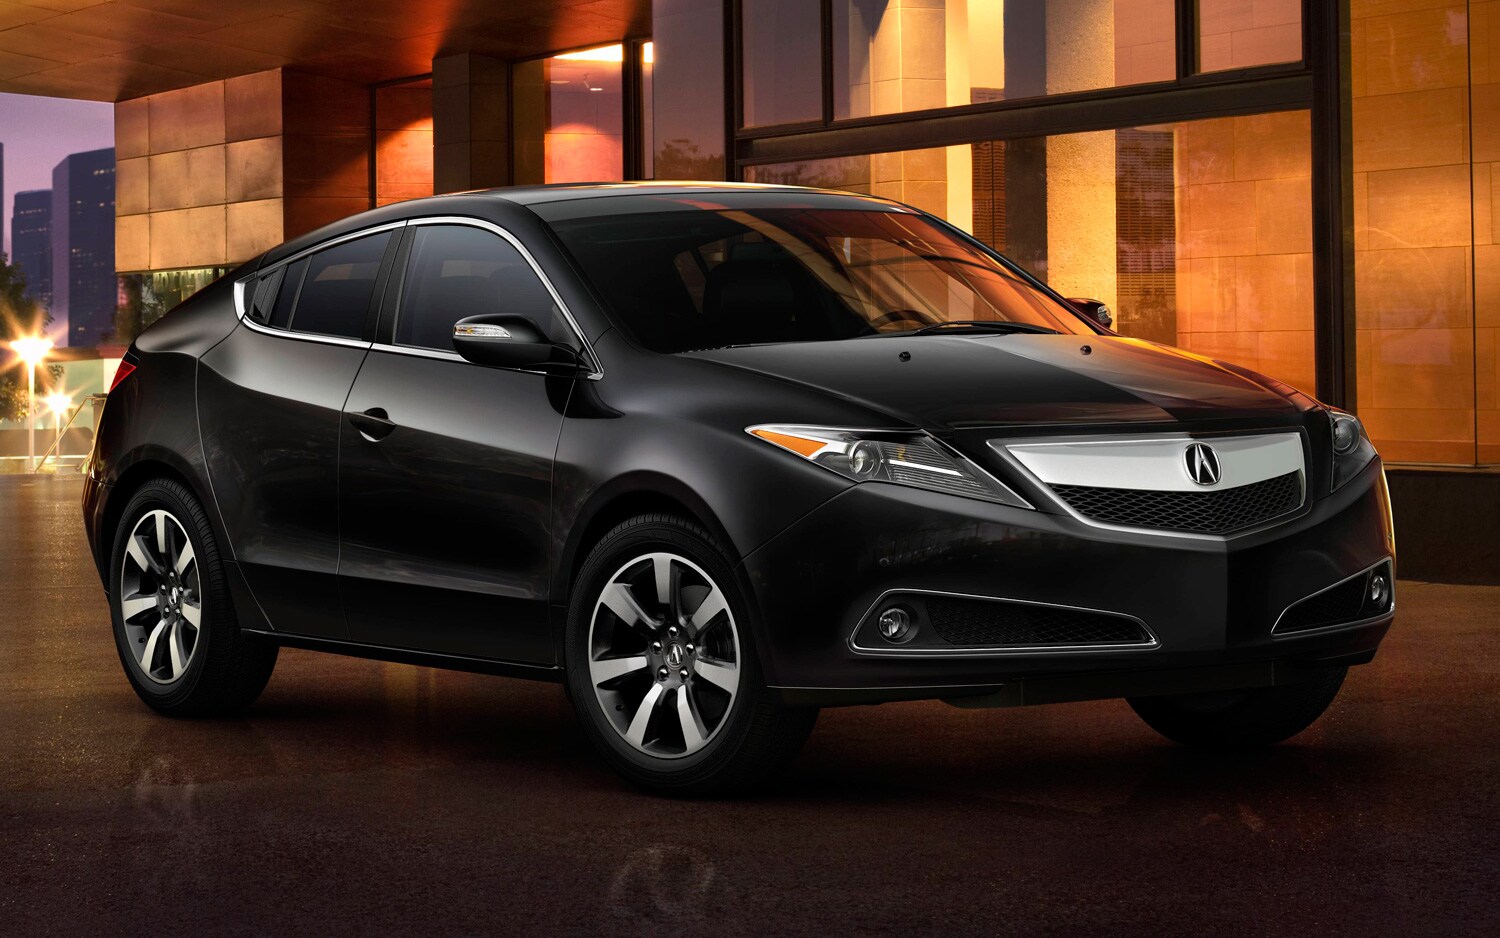 Discontinued: The 2013 Acura ZDX Will Be The Last Acura ZDX